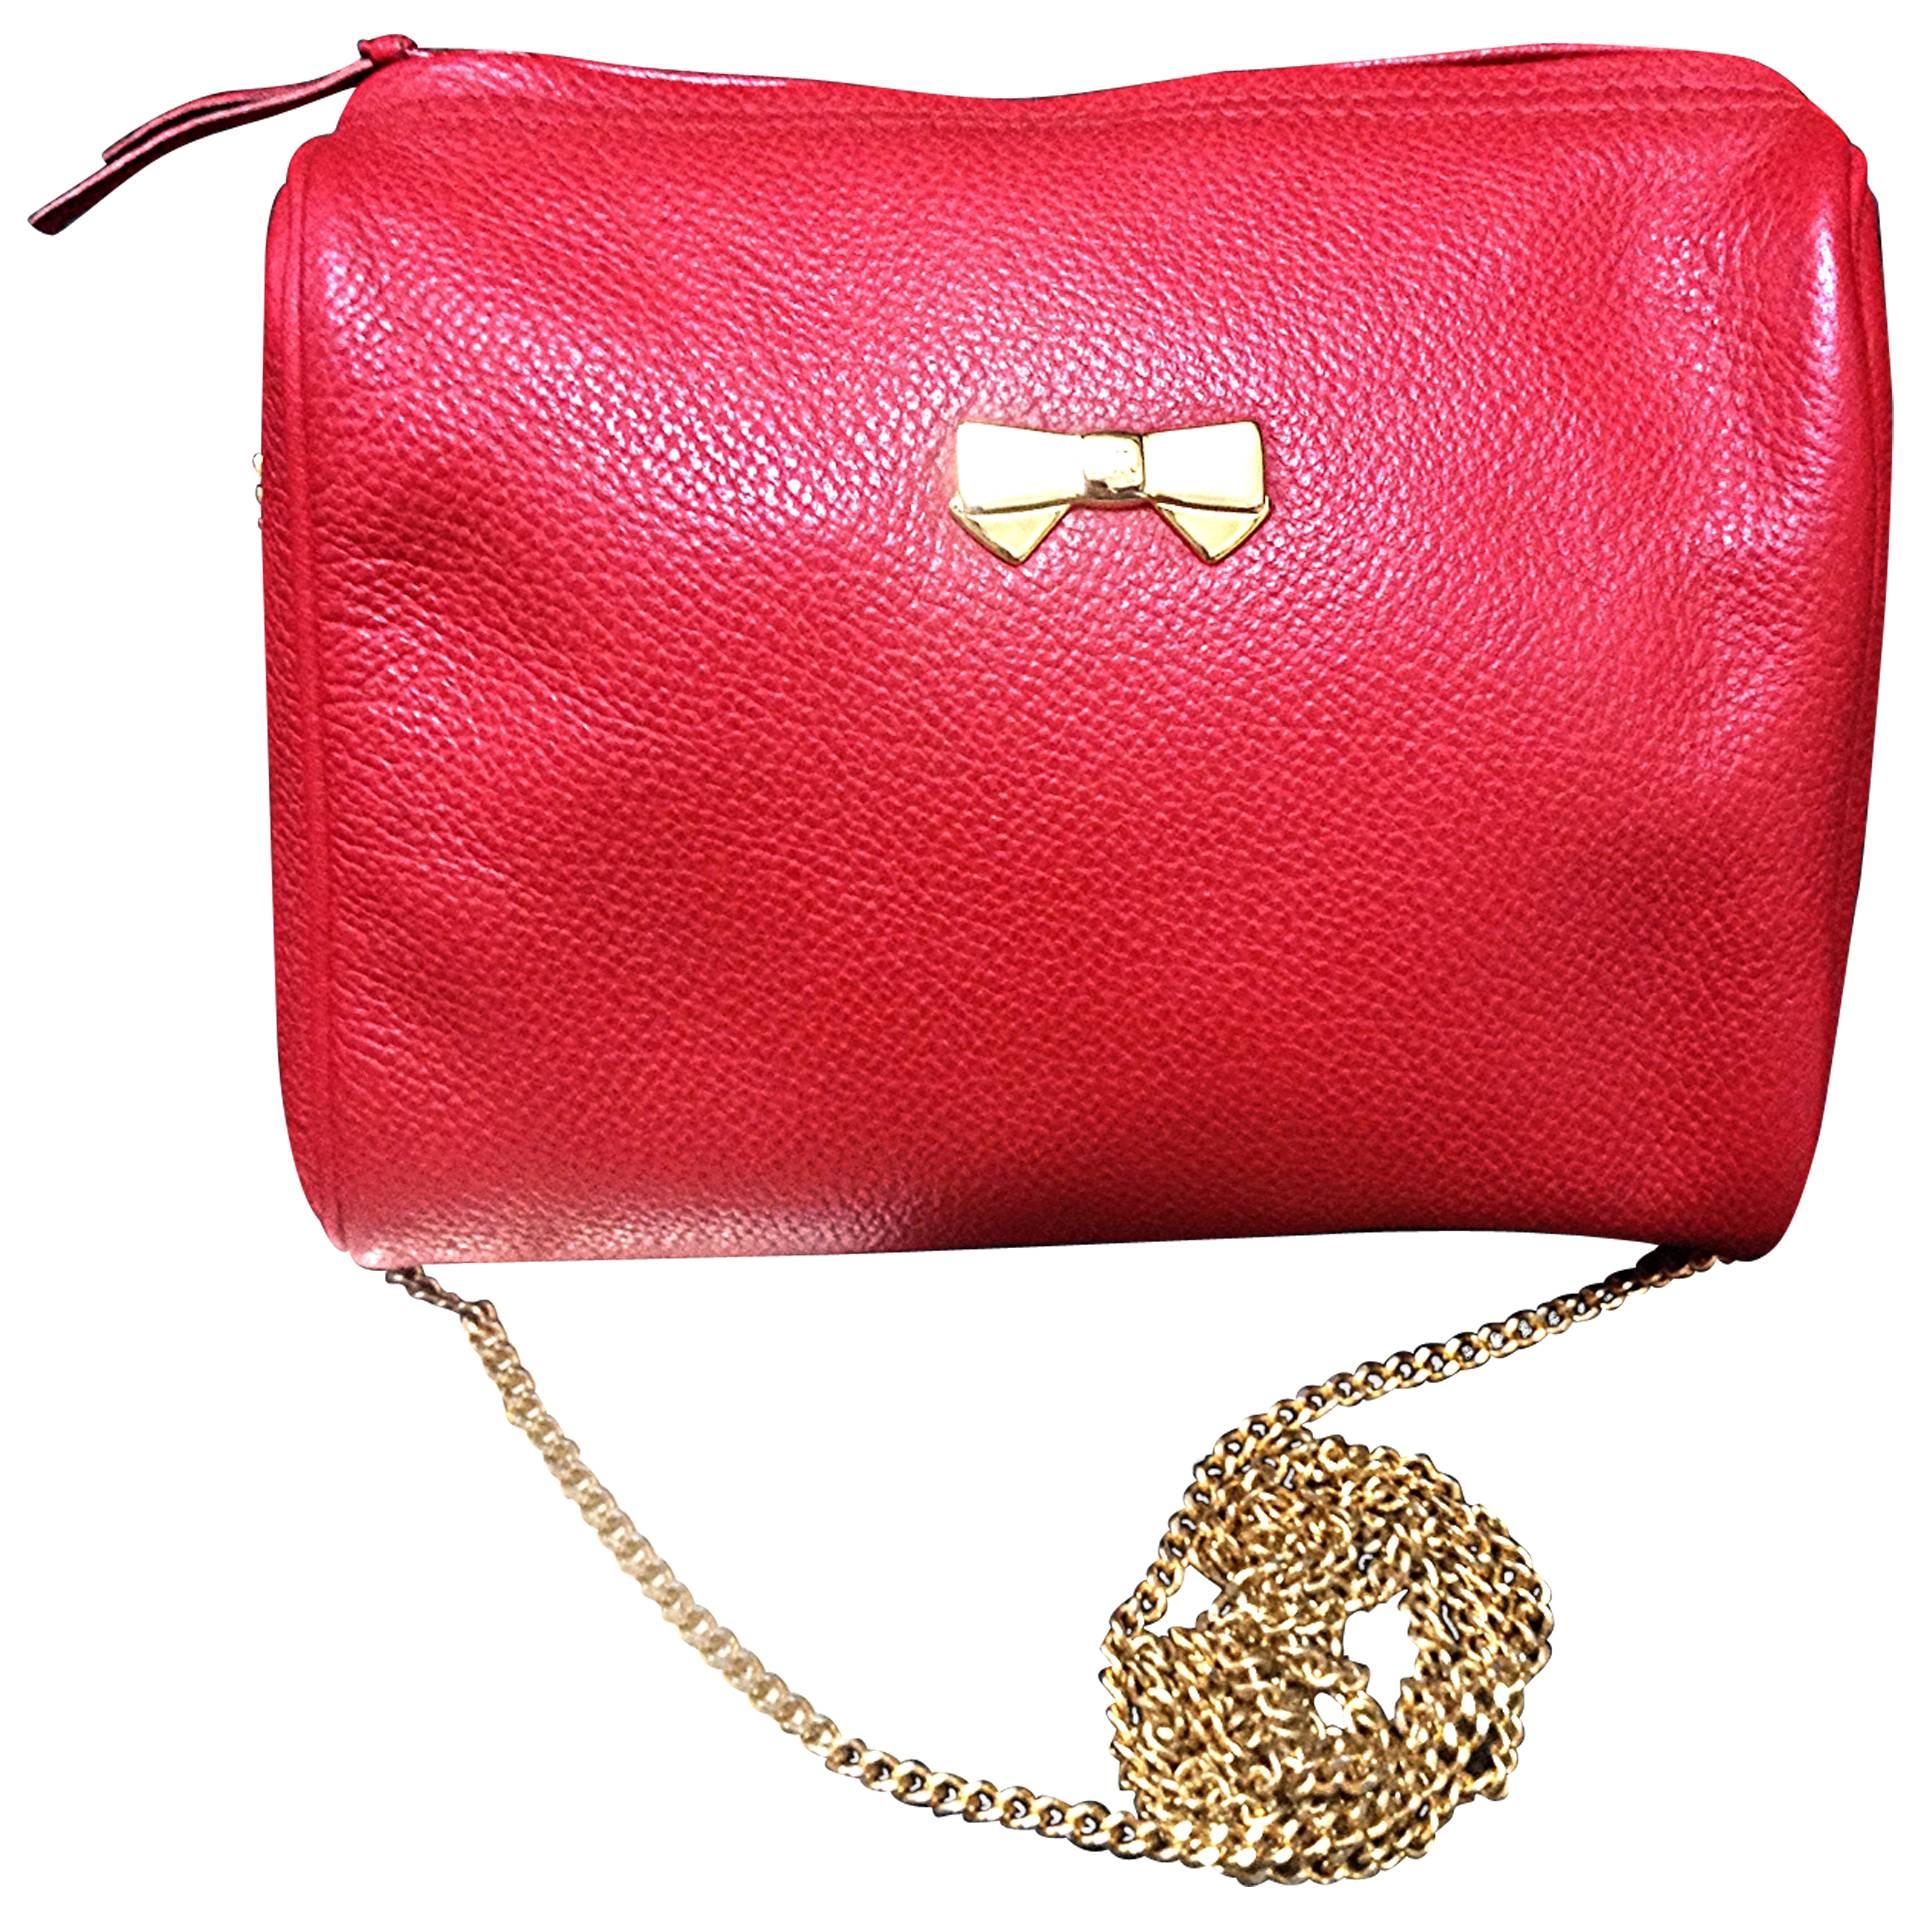 Vintage Nina Ricci red leather mini pouch purse with golden chain shoulder strap